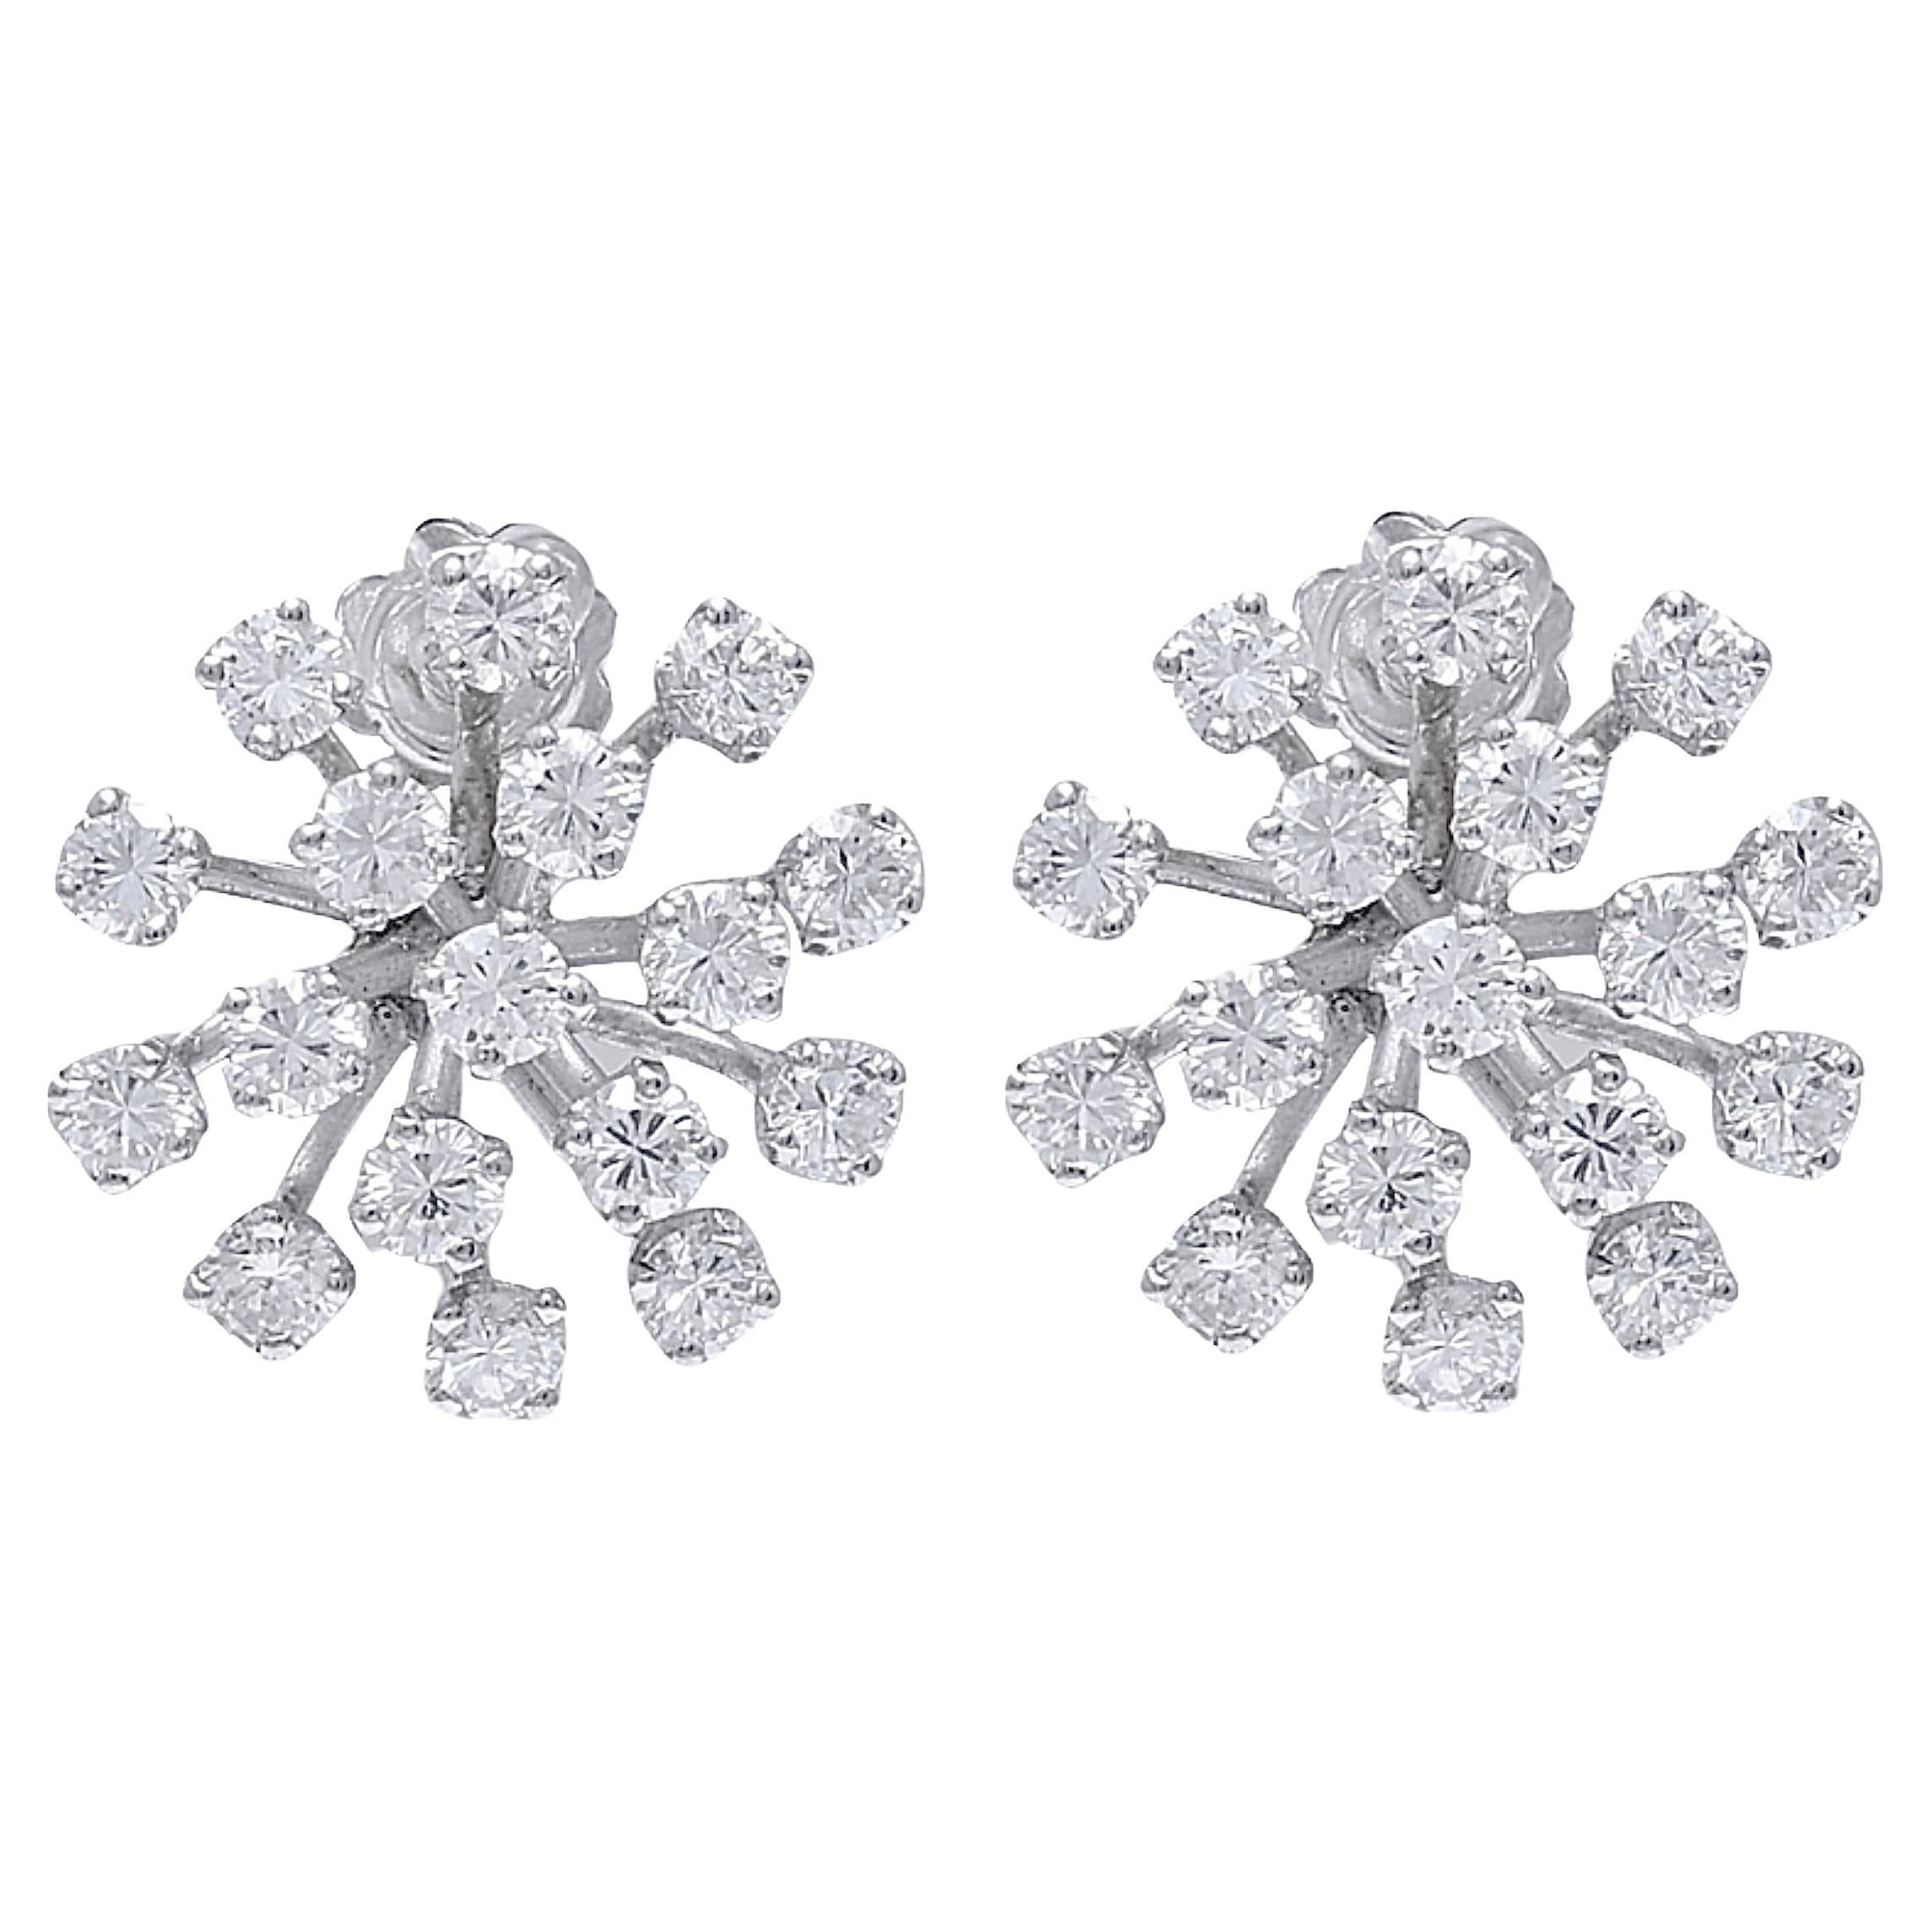 18 Karat White Gold Clip-On Earrings with 34 Brilliant Cut Diamonds Top Quality